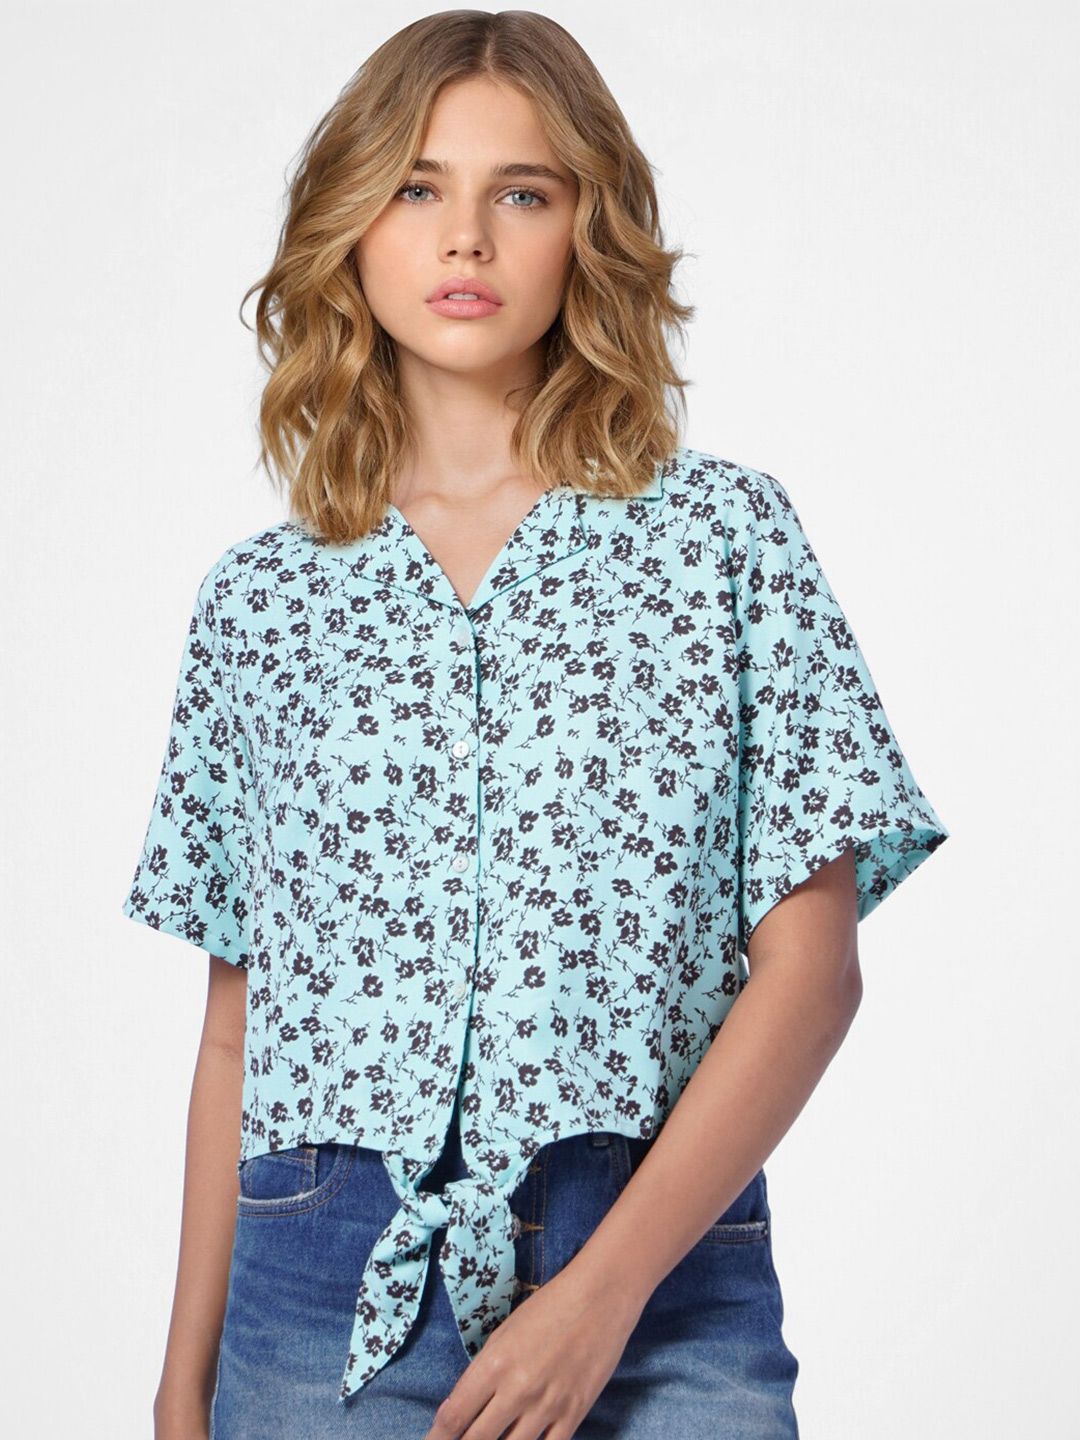 ONLY Blue Floral Print Top Price in India